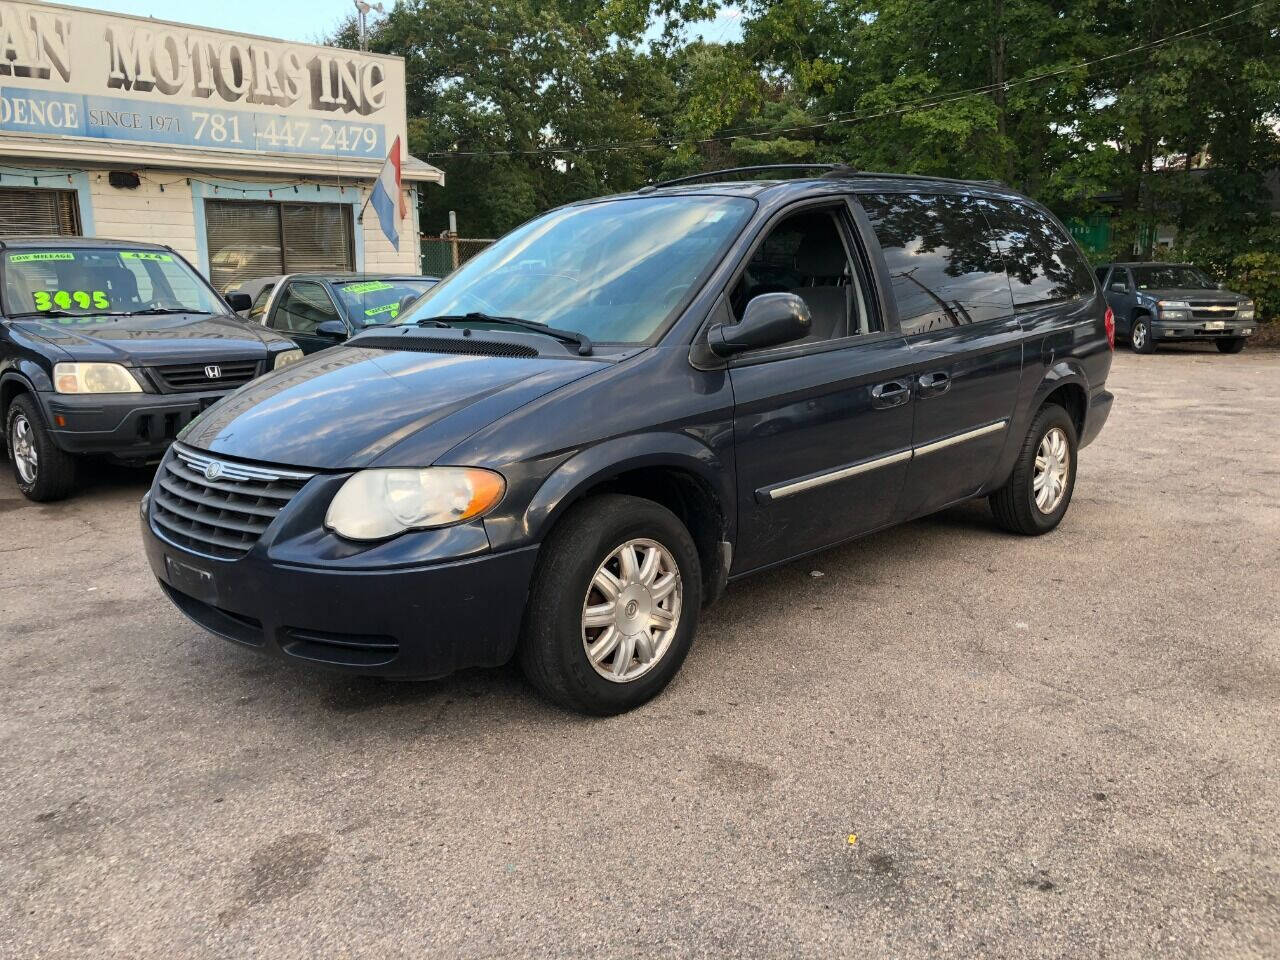 2007 Chrysler Town & Country for Sale in Montauk, NY